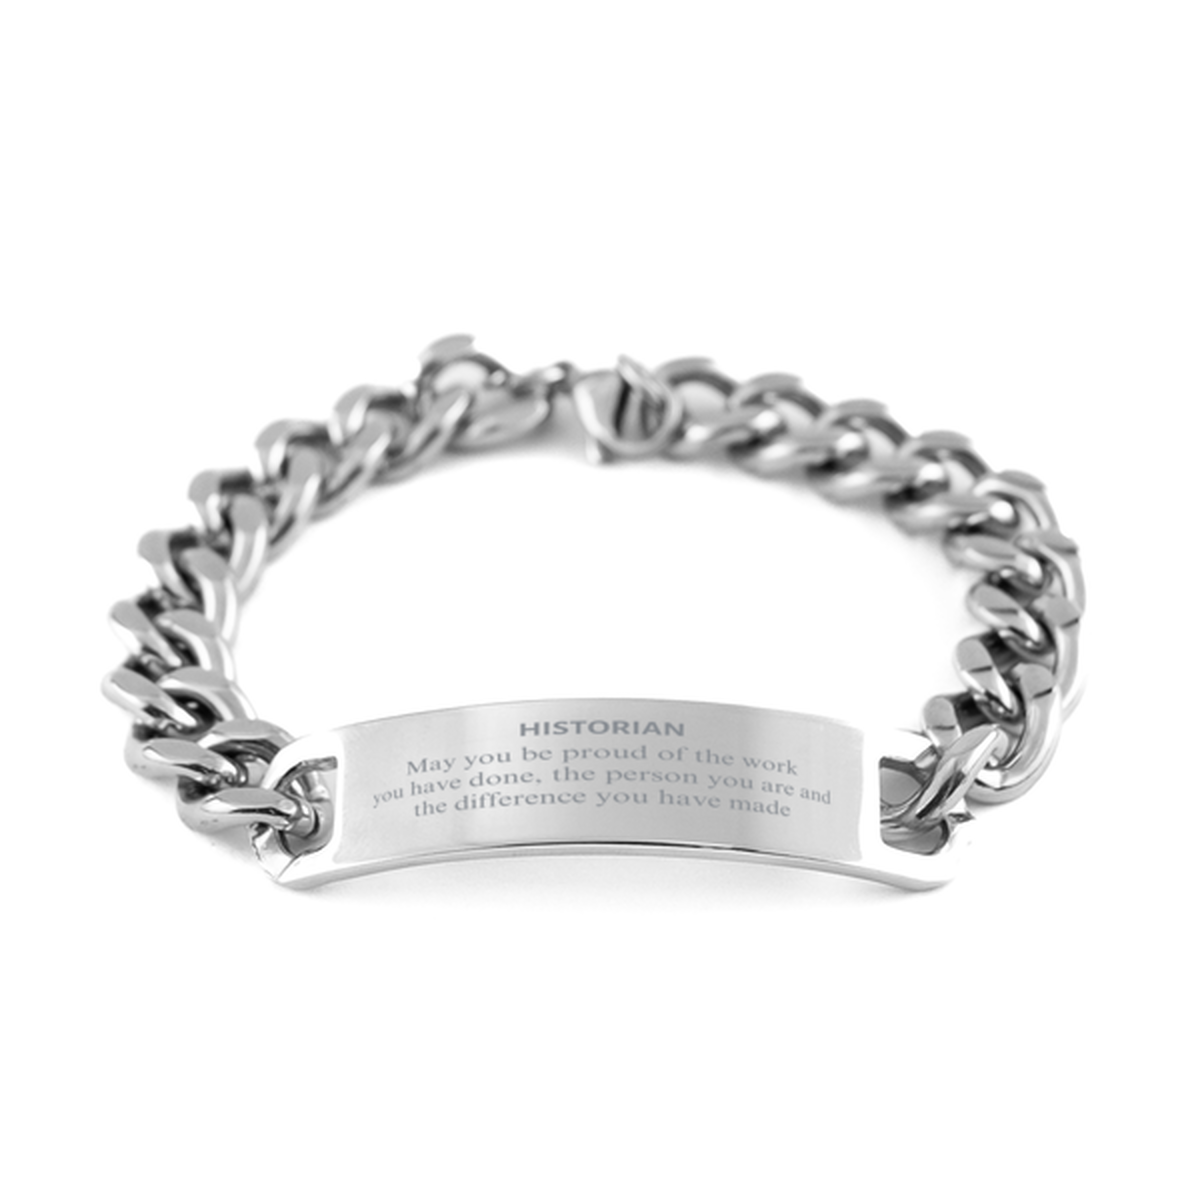 Historian May you be proud of the work you have done, Retirement Historian Cuban Chain Stainless Steel Bracelet for Colleague Appreciation Gifts Amazing for Historian